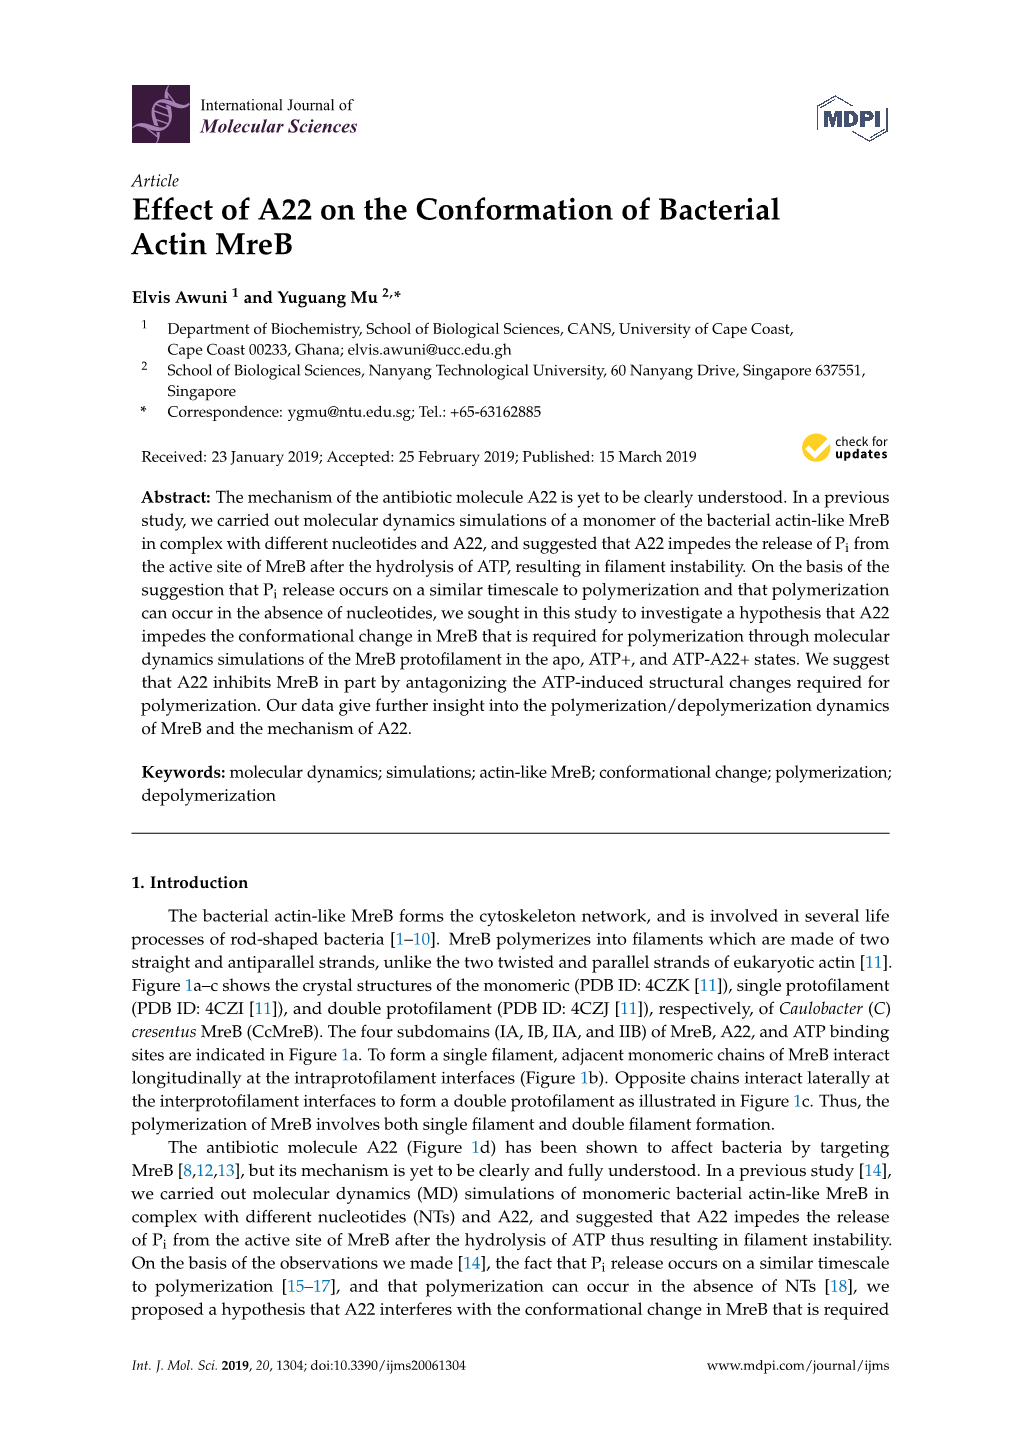 Effect of A22 on the Conformation of Bacterial Actin Mreb